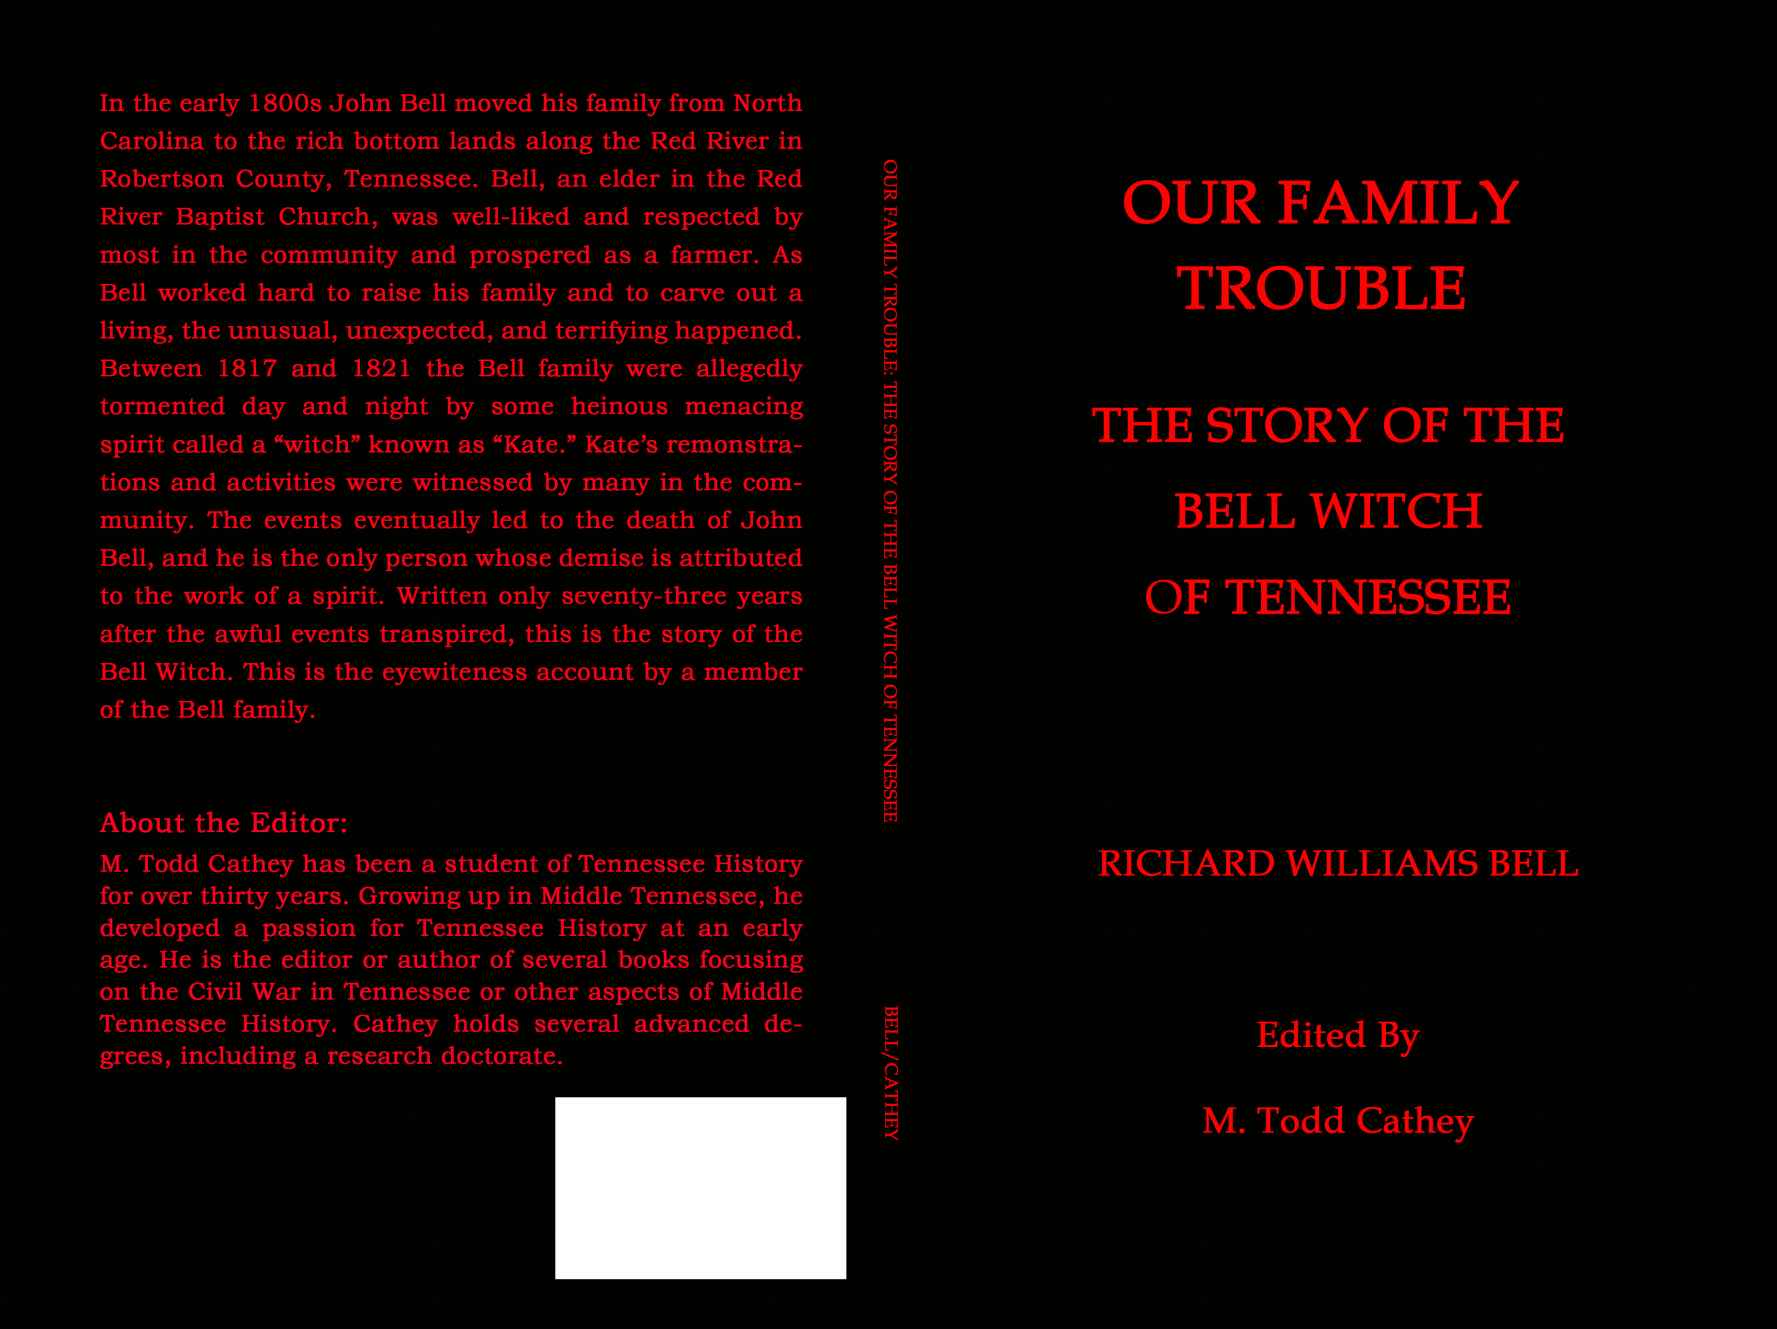 Our Family Trouble The Story of the Bell Witch of Tennessee by Unknown